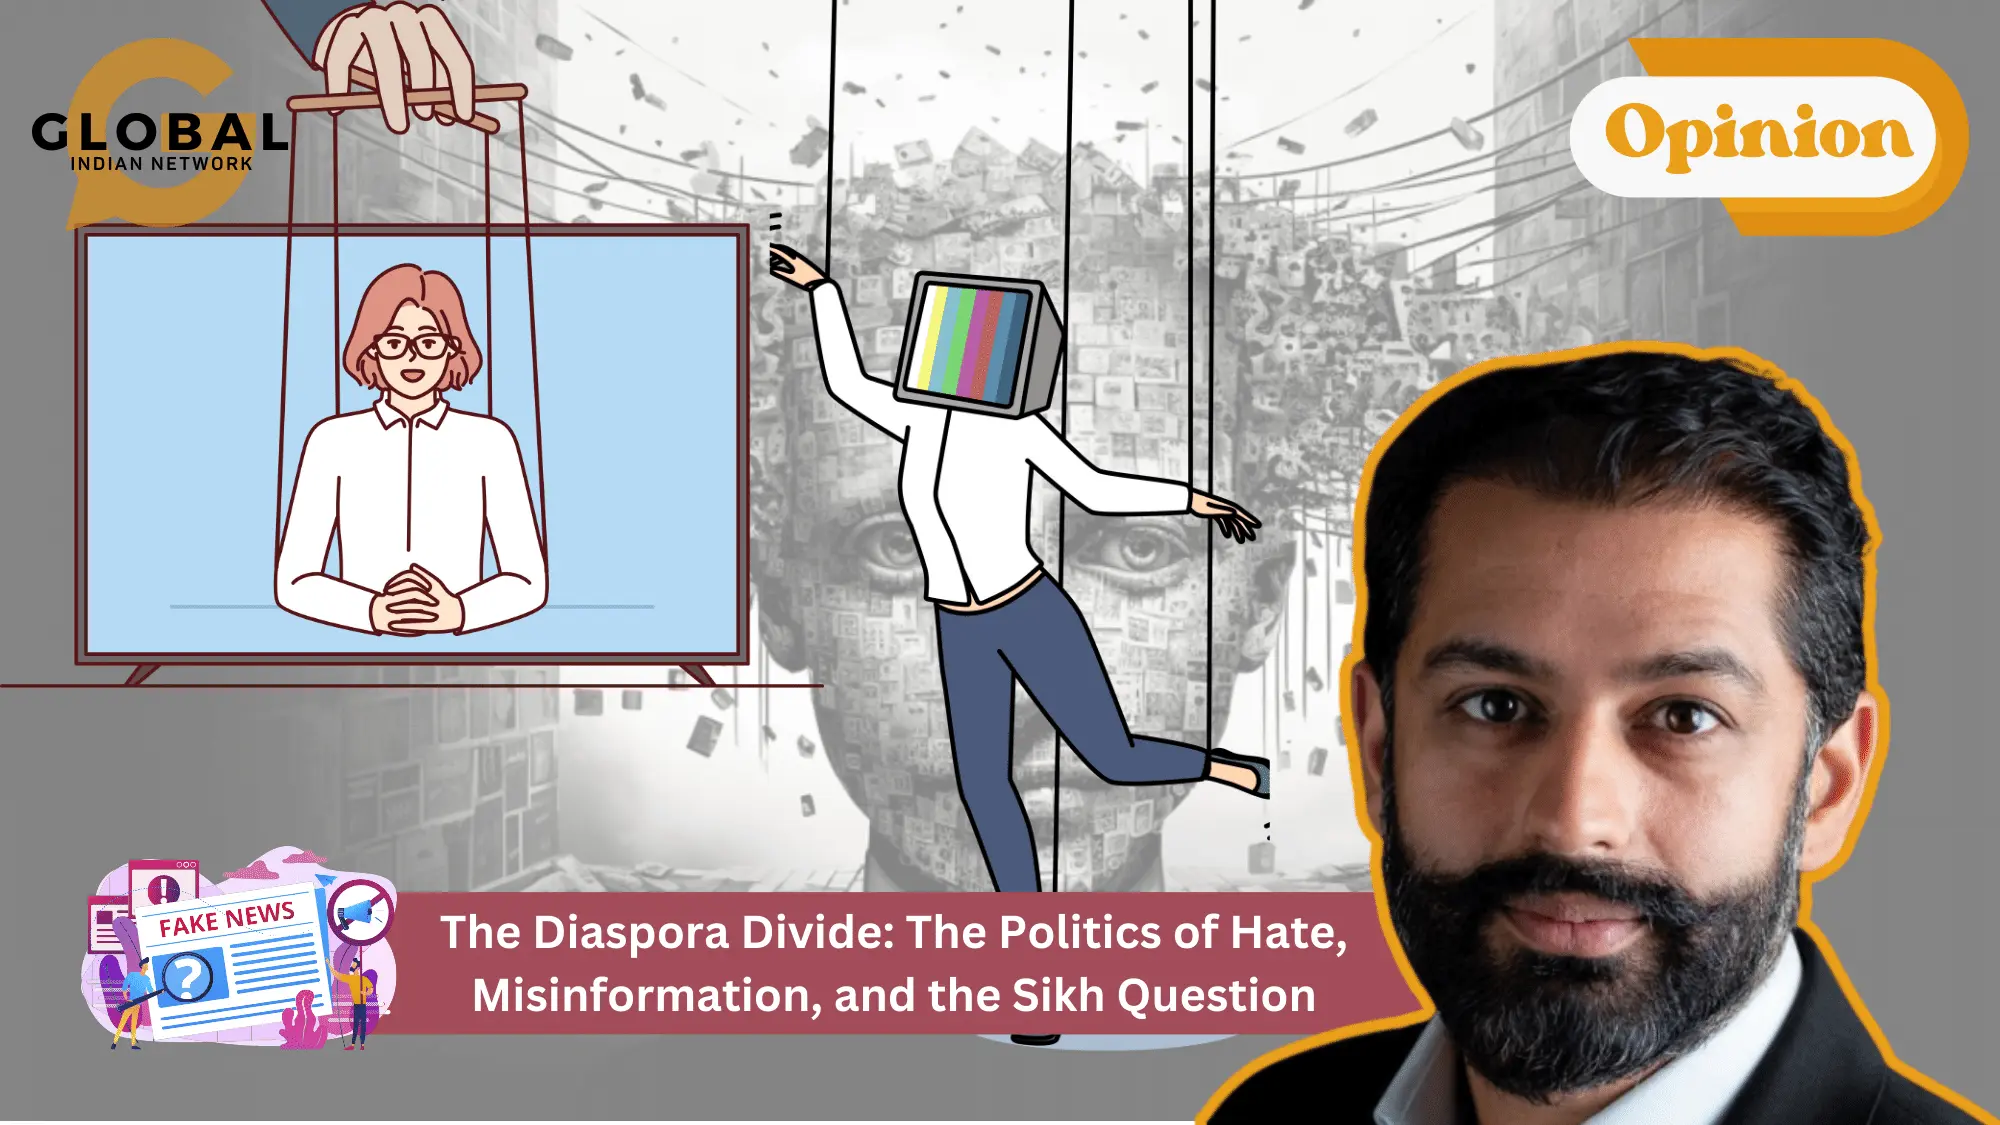 The Diaspora Divide: The Politics of Hate, Misinformation, and the Sikh Question